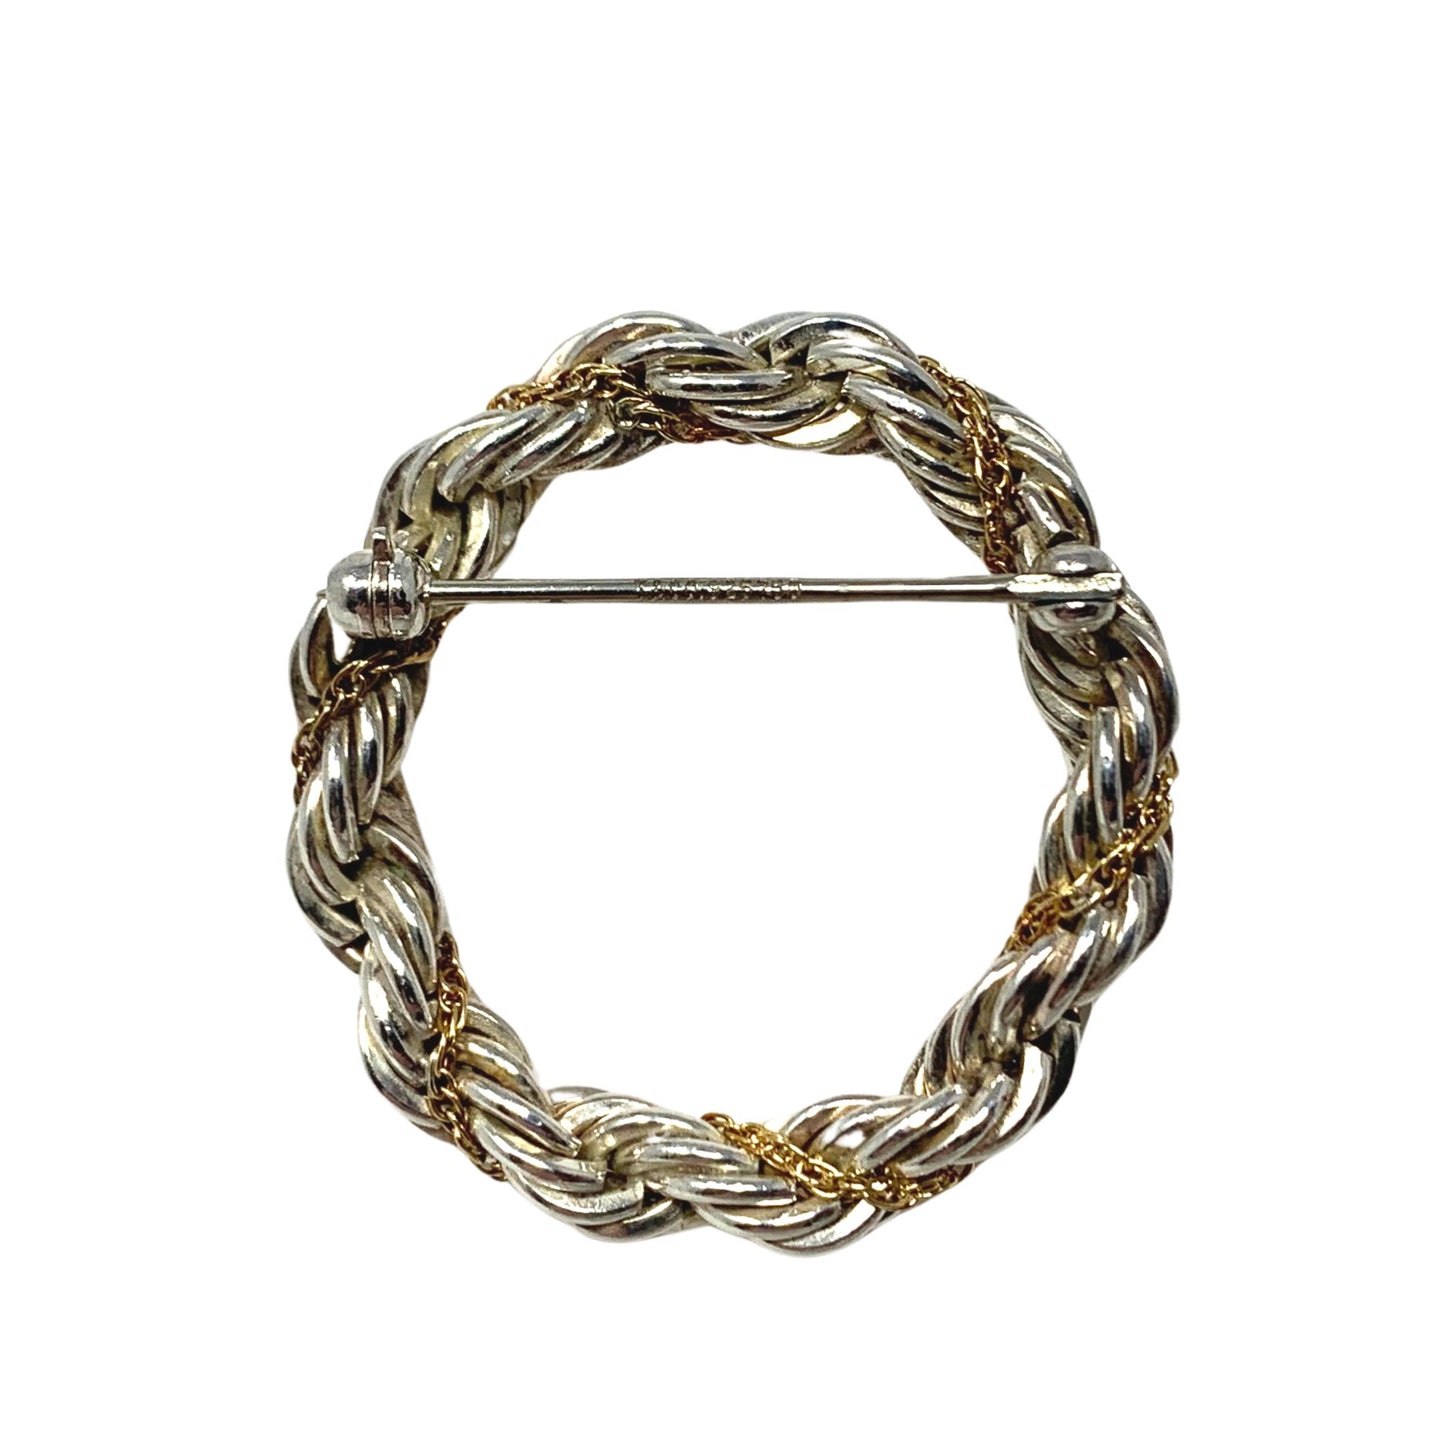 Tiffany & Co 14K Gold/ Sterling Circle Rope Wreath Brooch